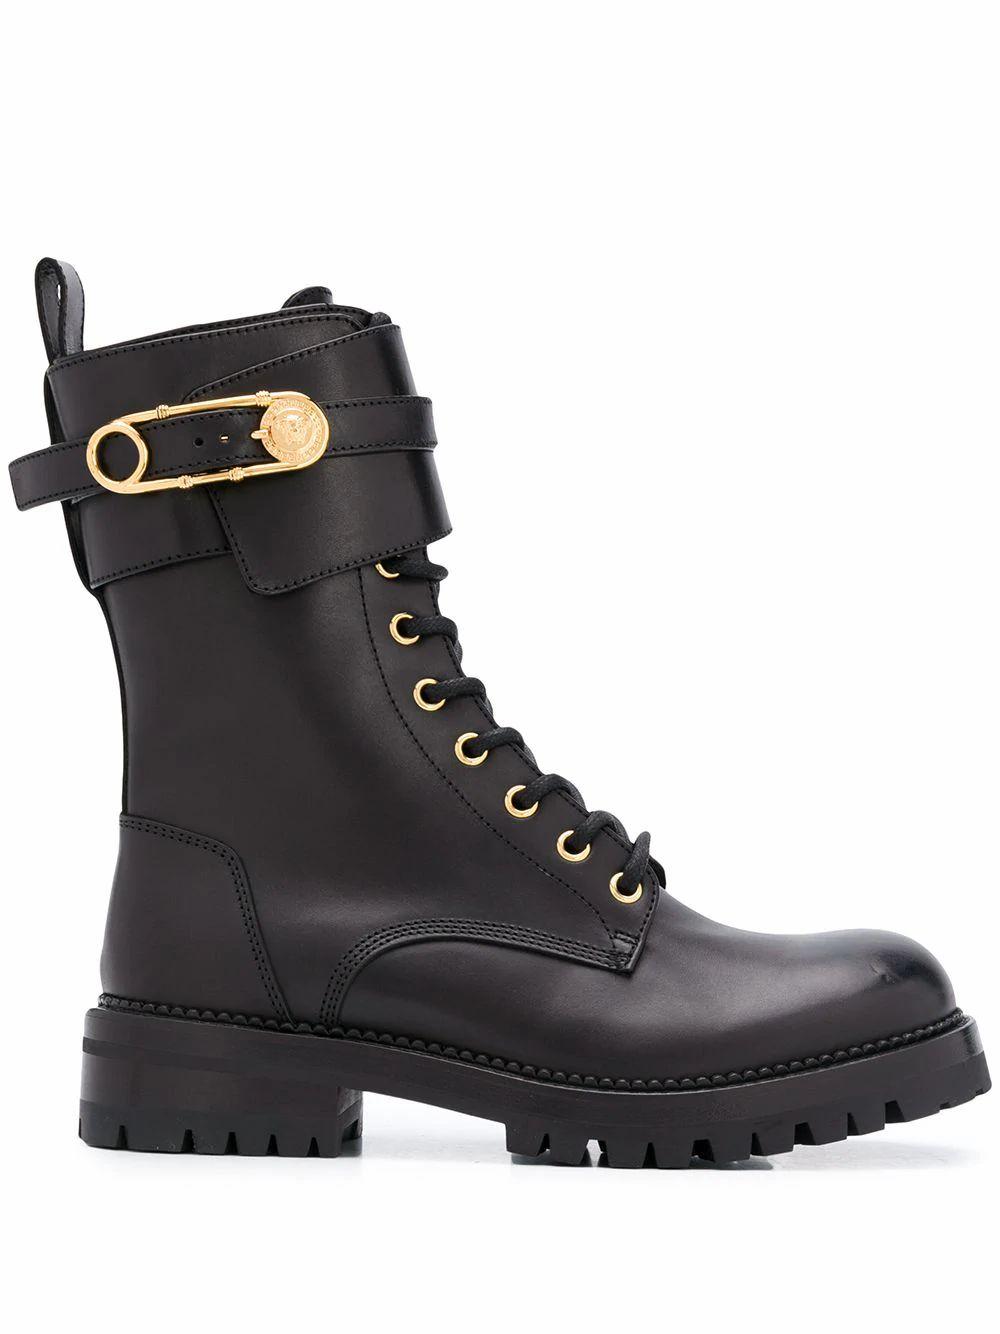 Versace Leather Ankle Boots in Black - Lyst